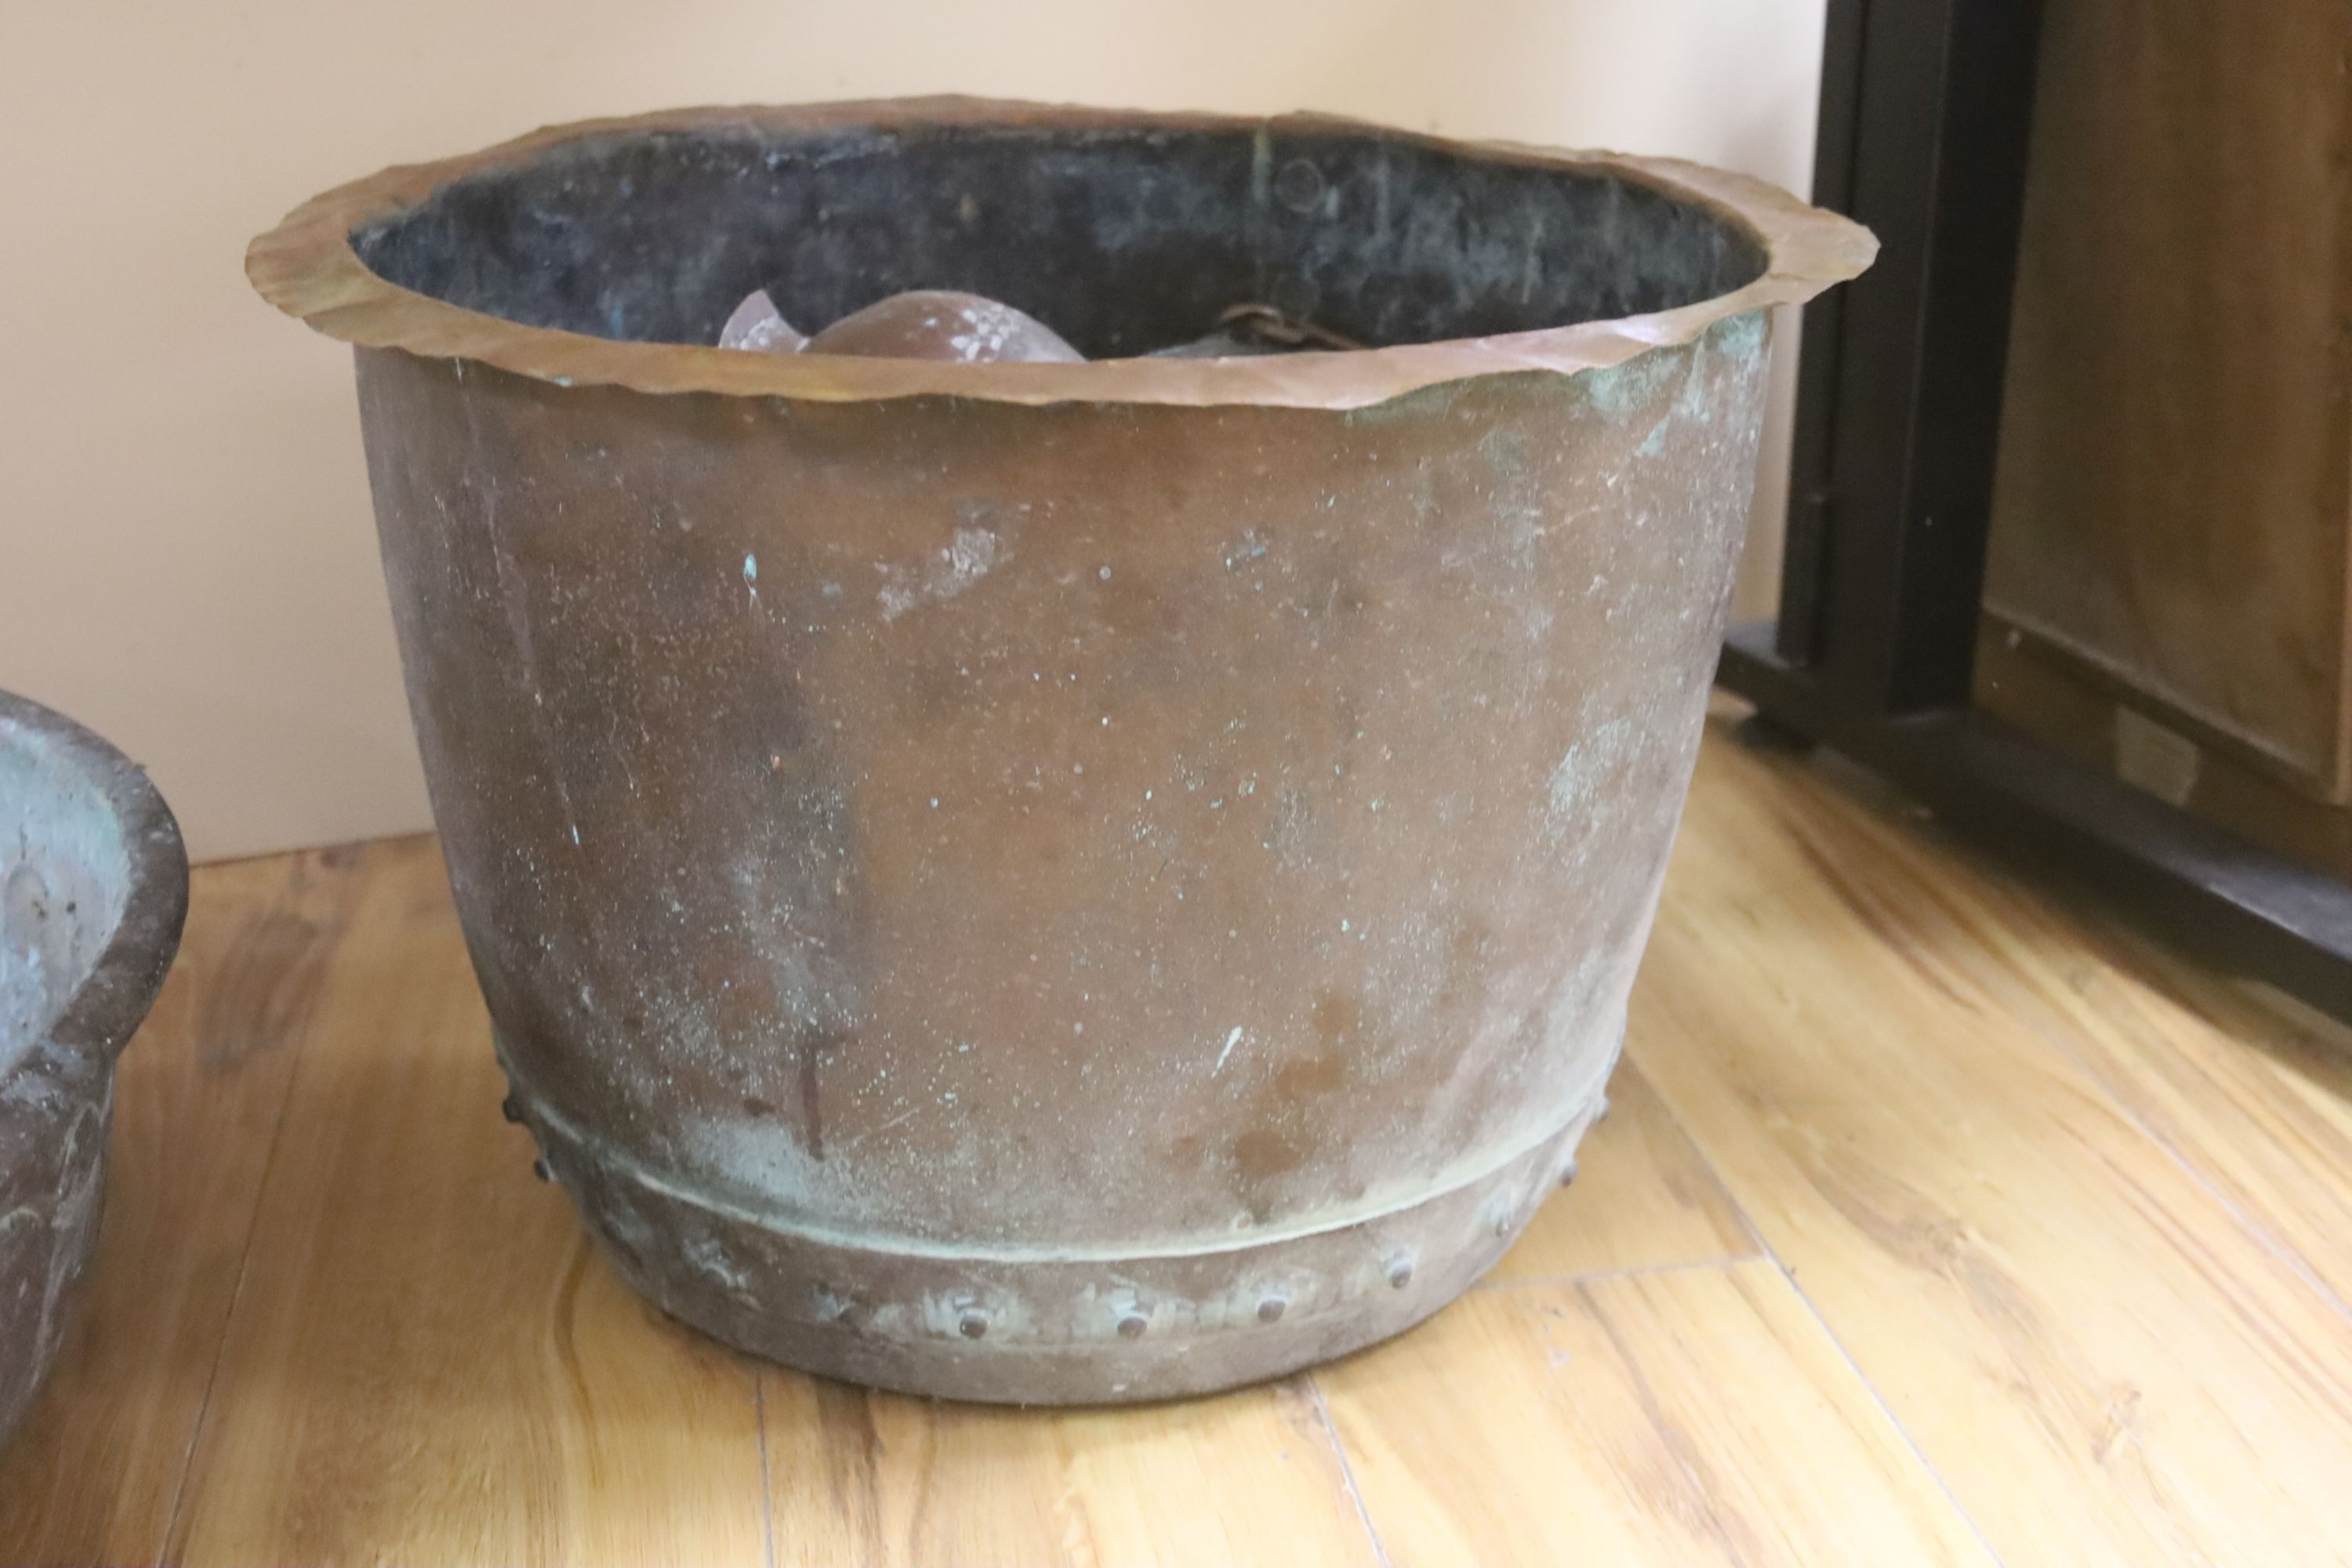 Two large copper bowls and related items, largest 54 cms diameter.